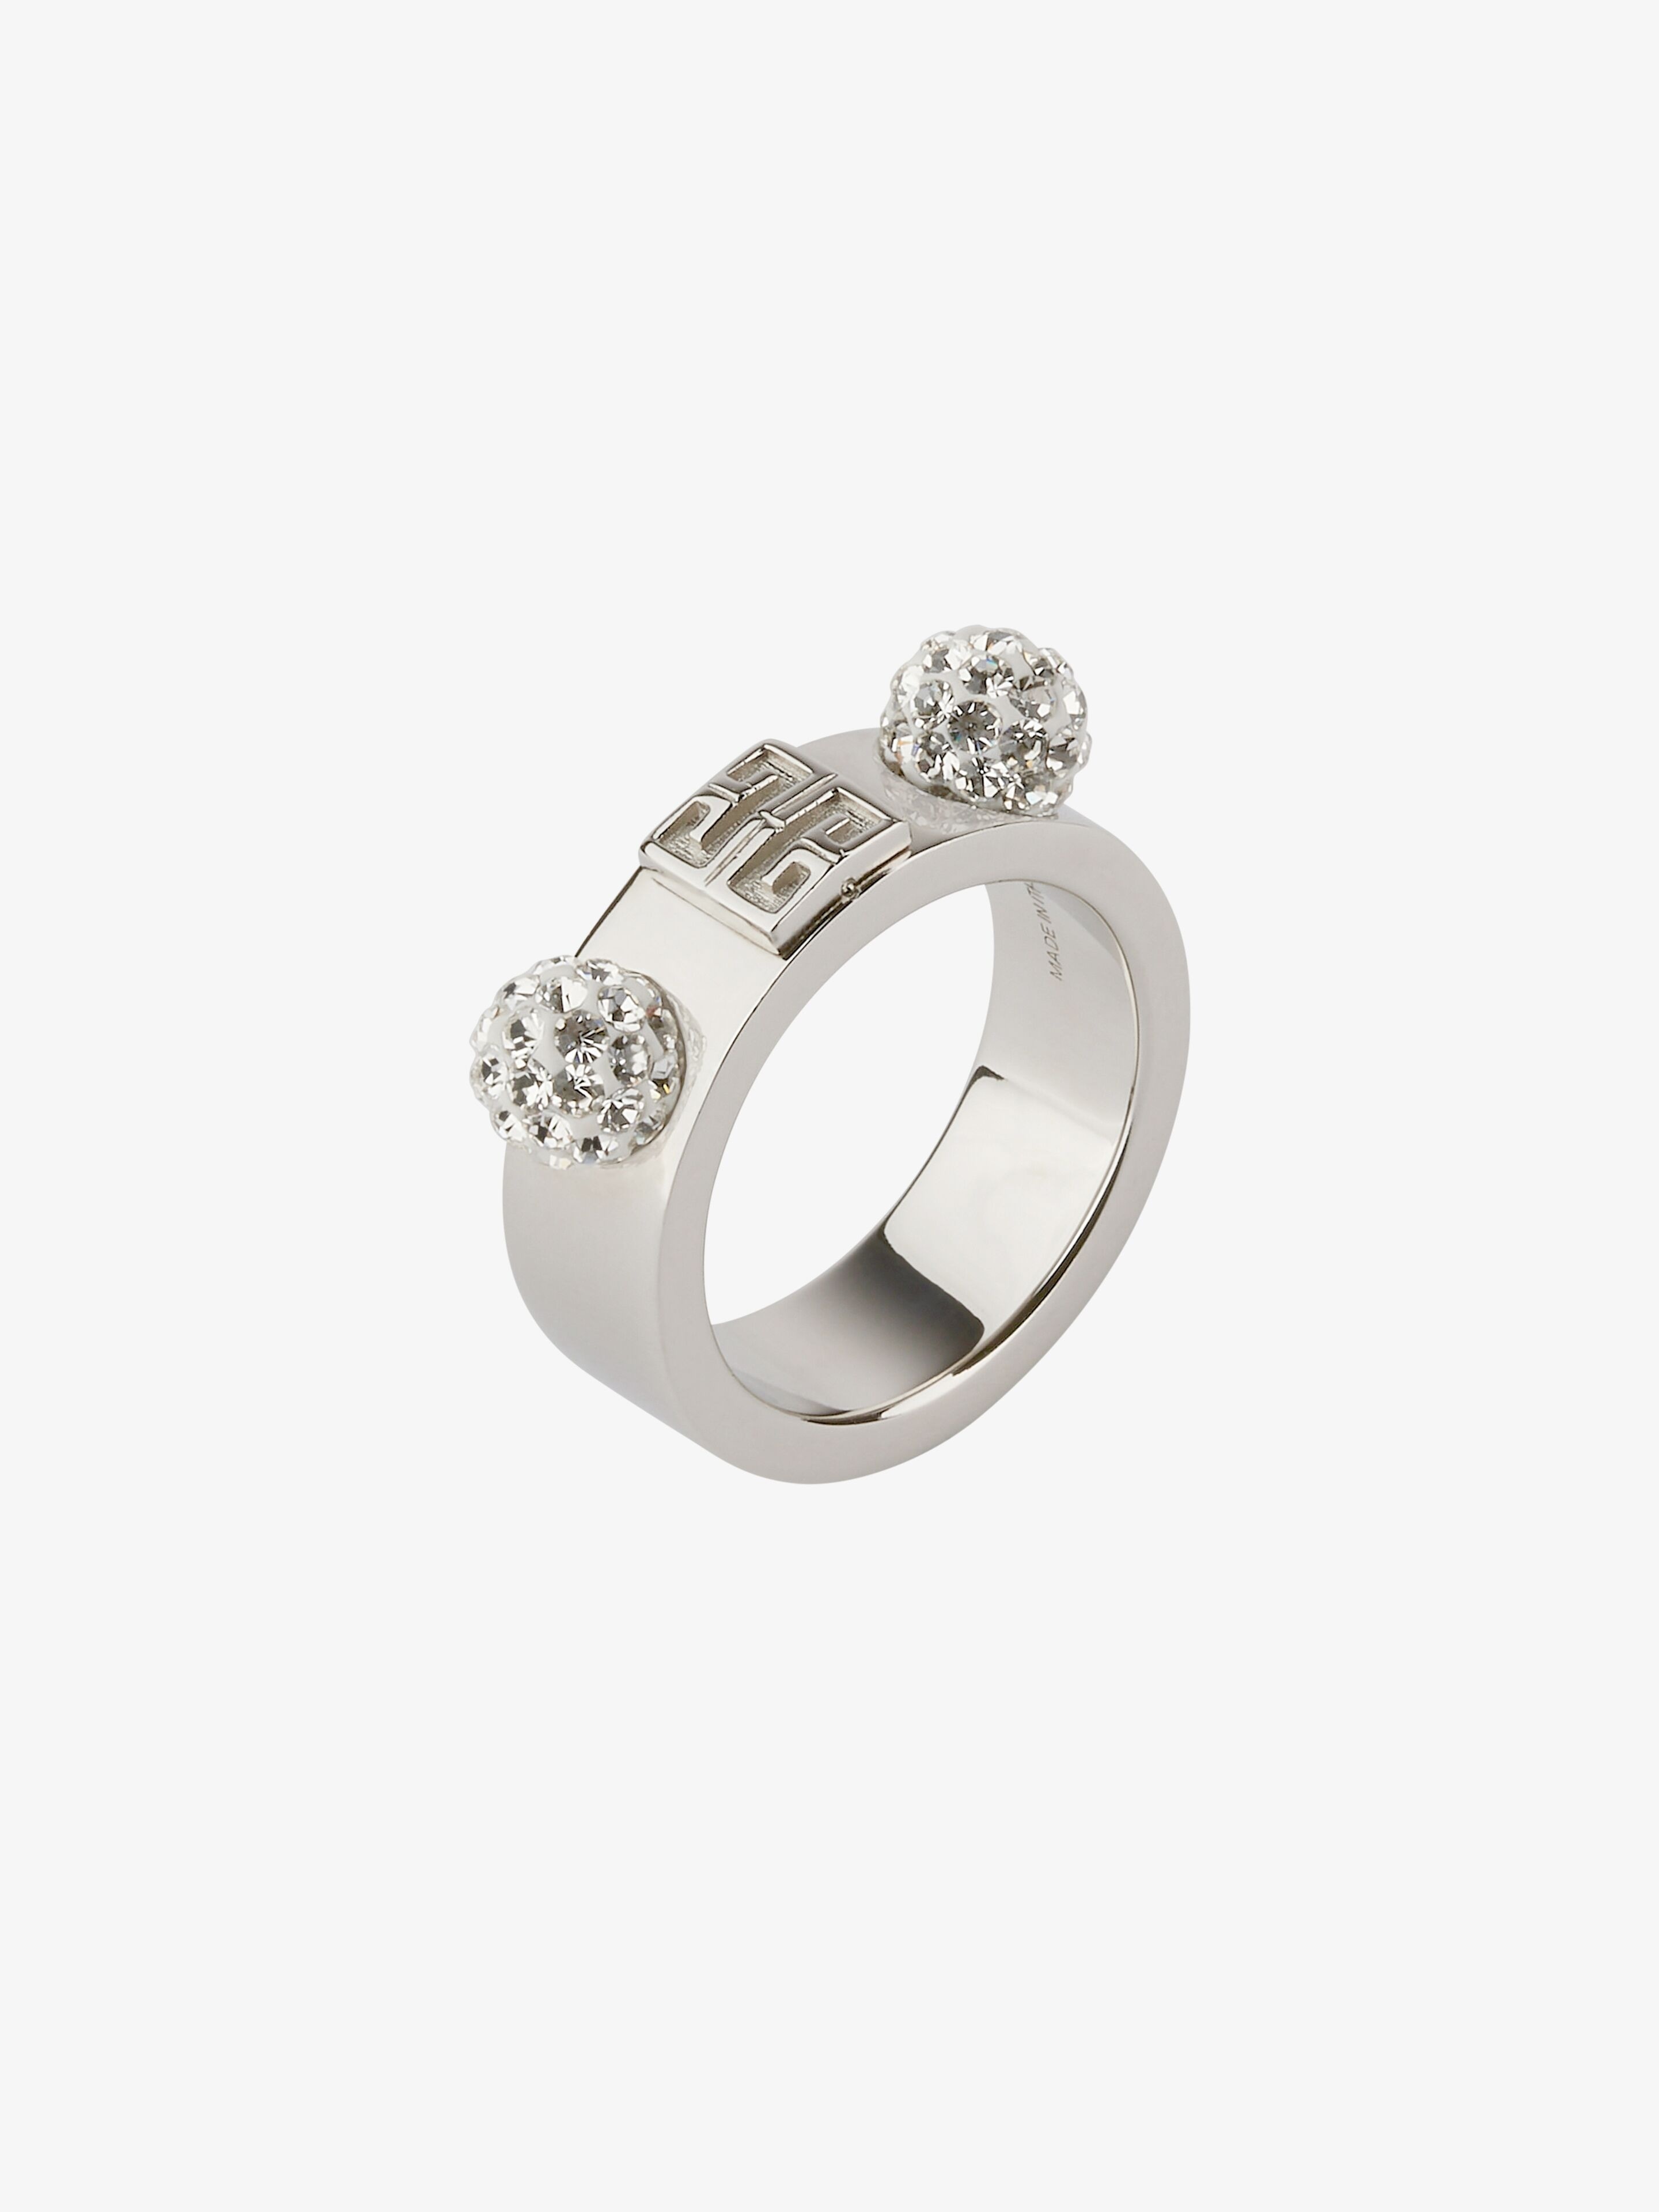 4G RING IN METAL WITH CRYSTALS - 4